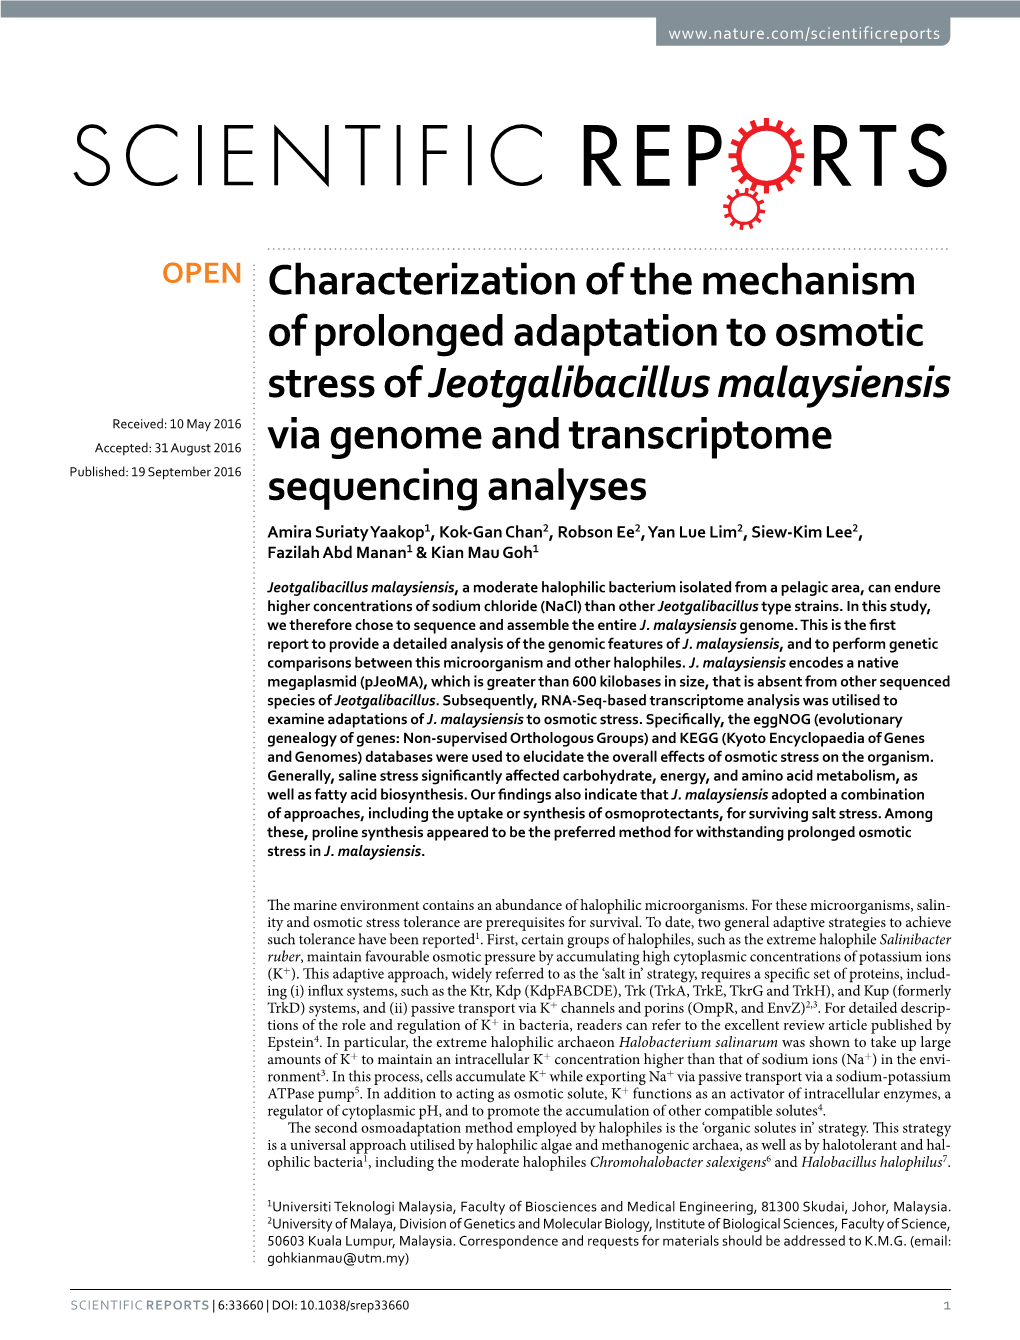 Characterization of the Mechanism of Prolonged Adaptation to Osmotic